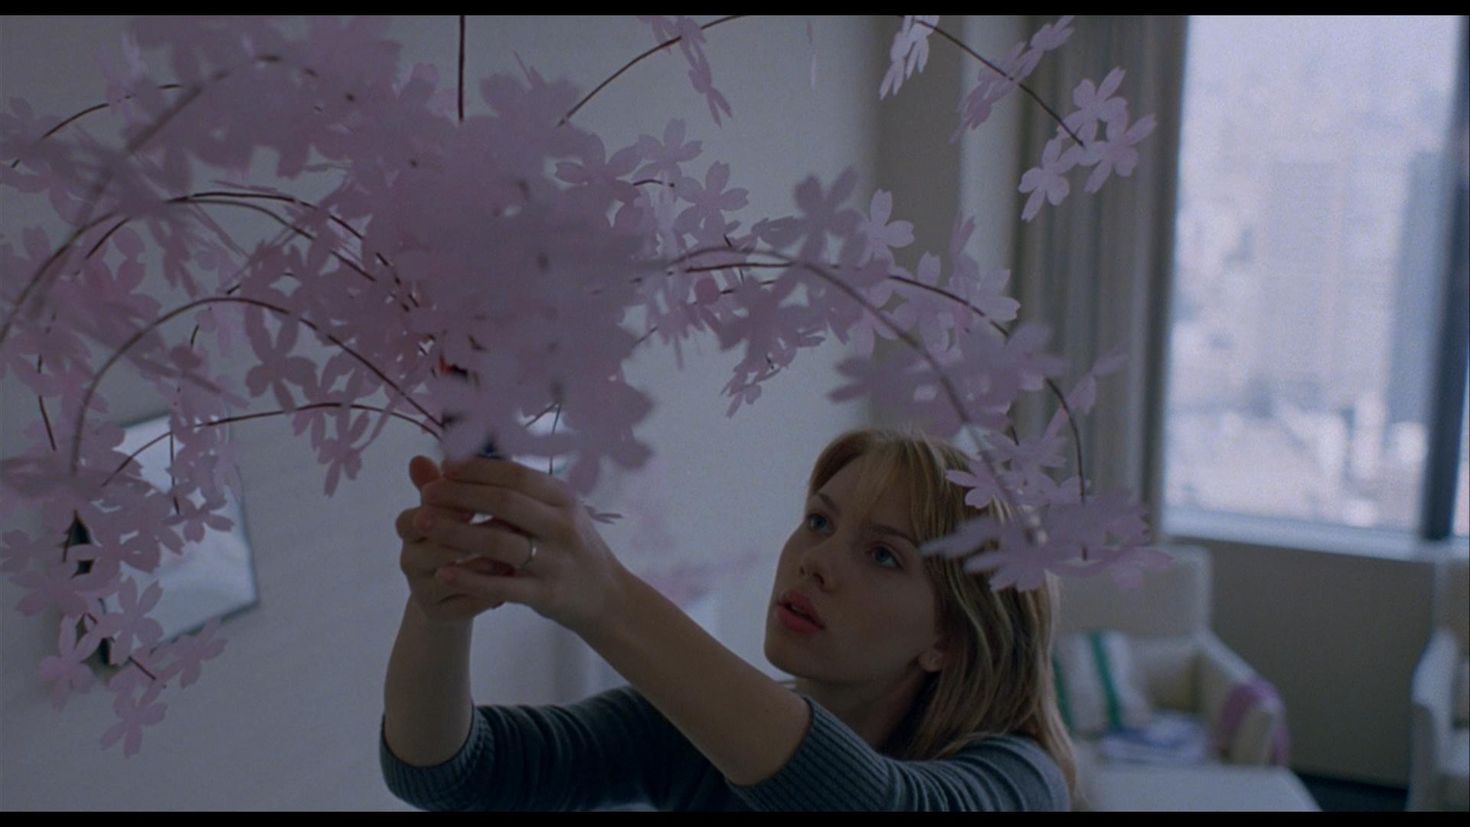 Lost in the first. Скарлетт Йоханссон Lost in translation. Lost in translation 2003.